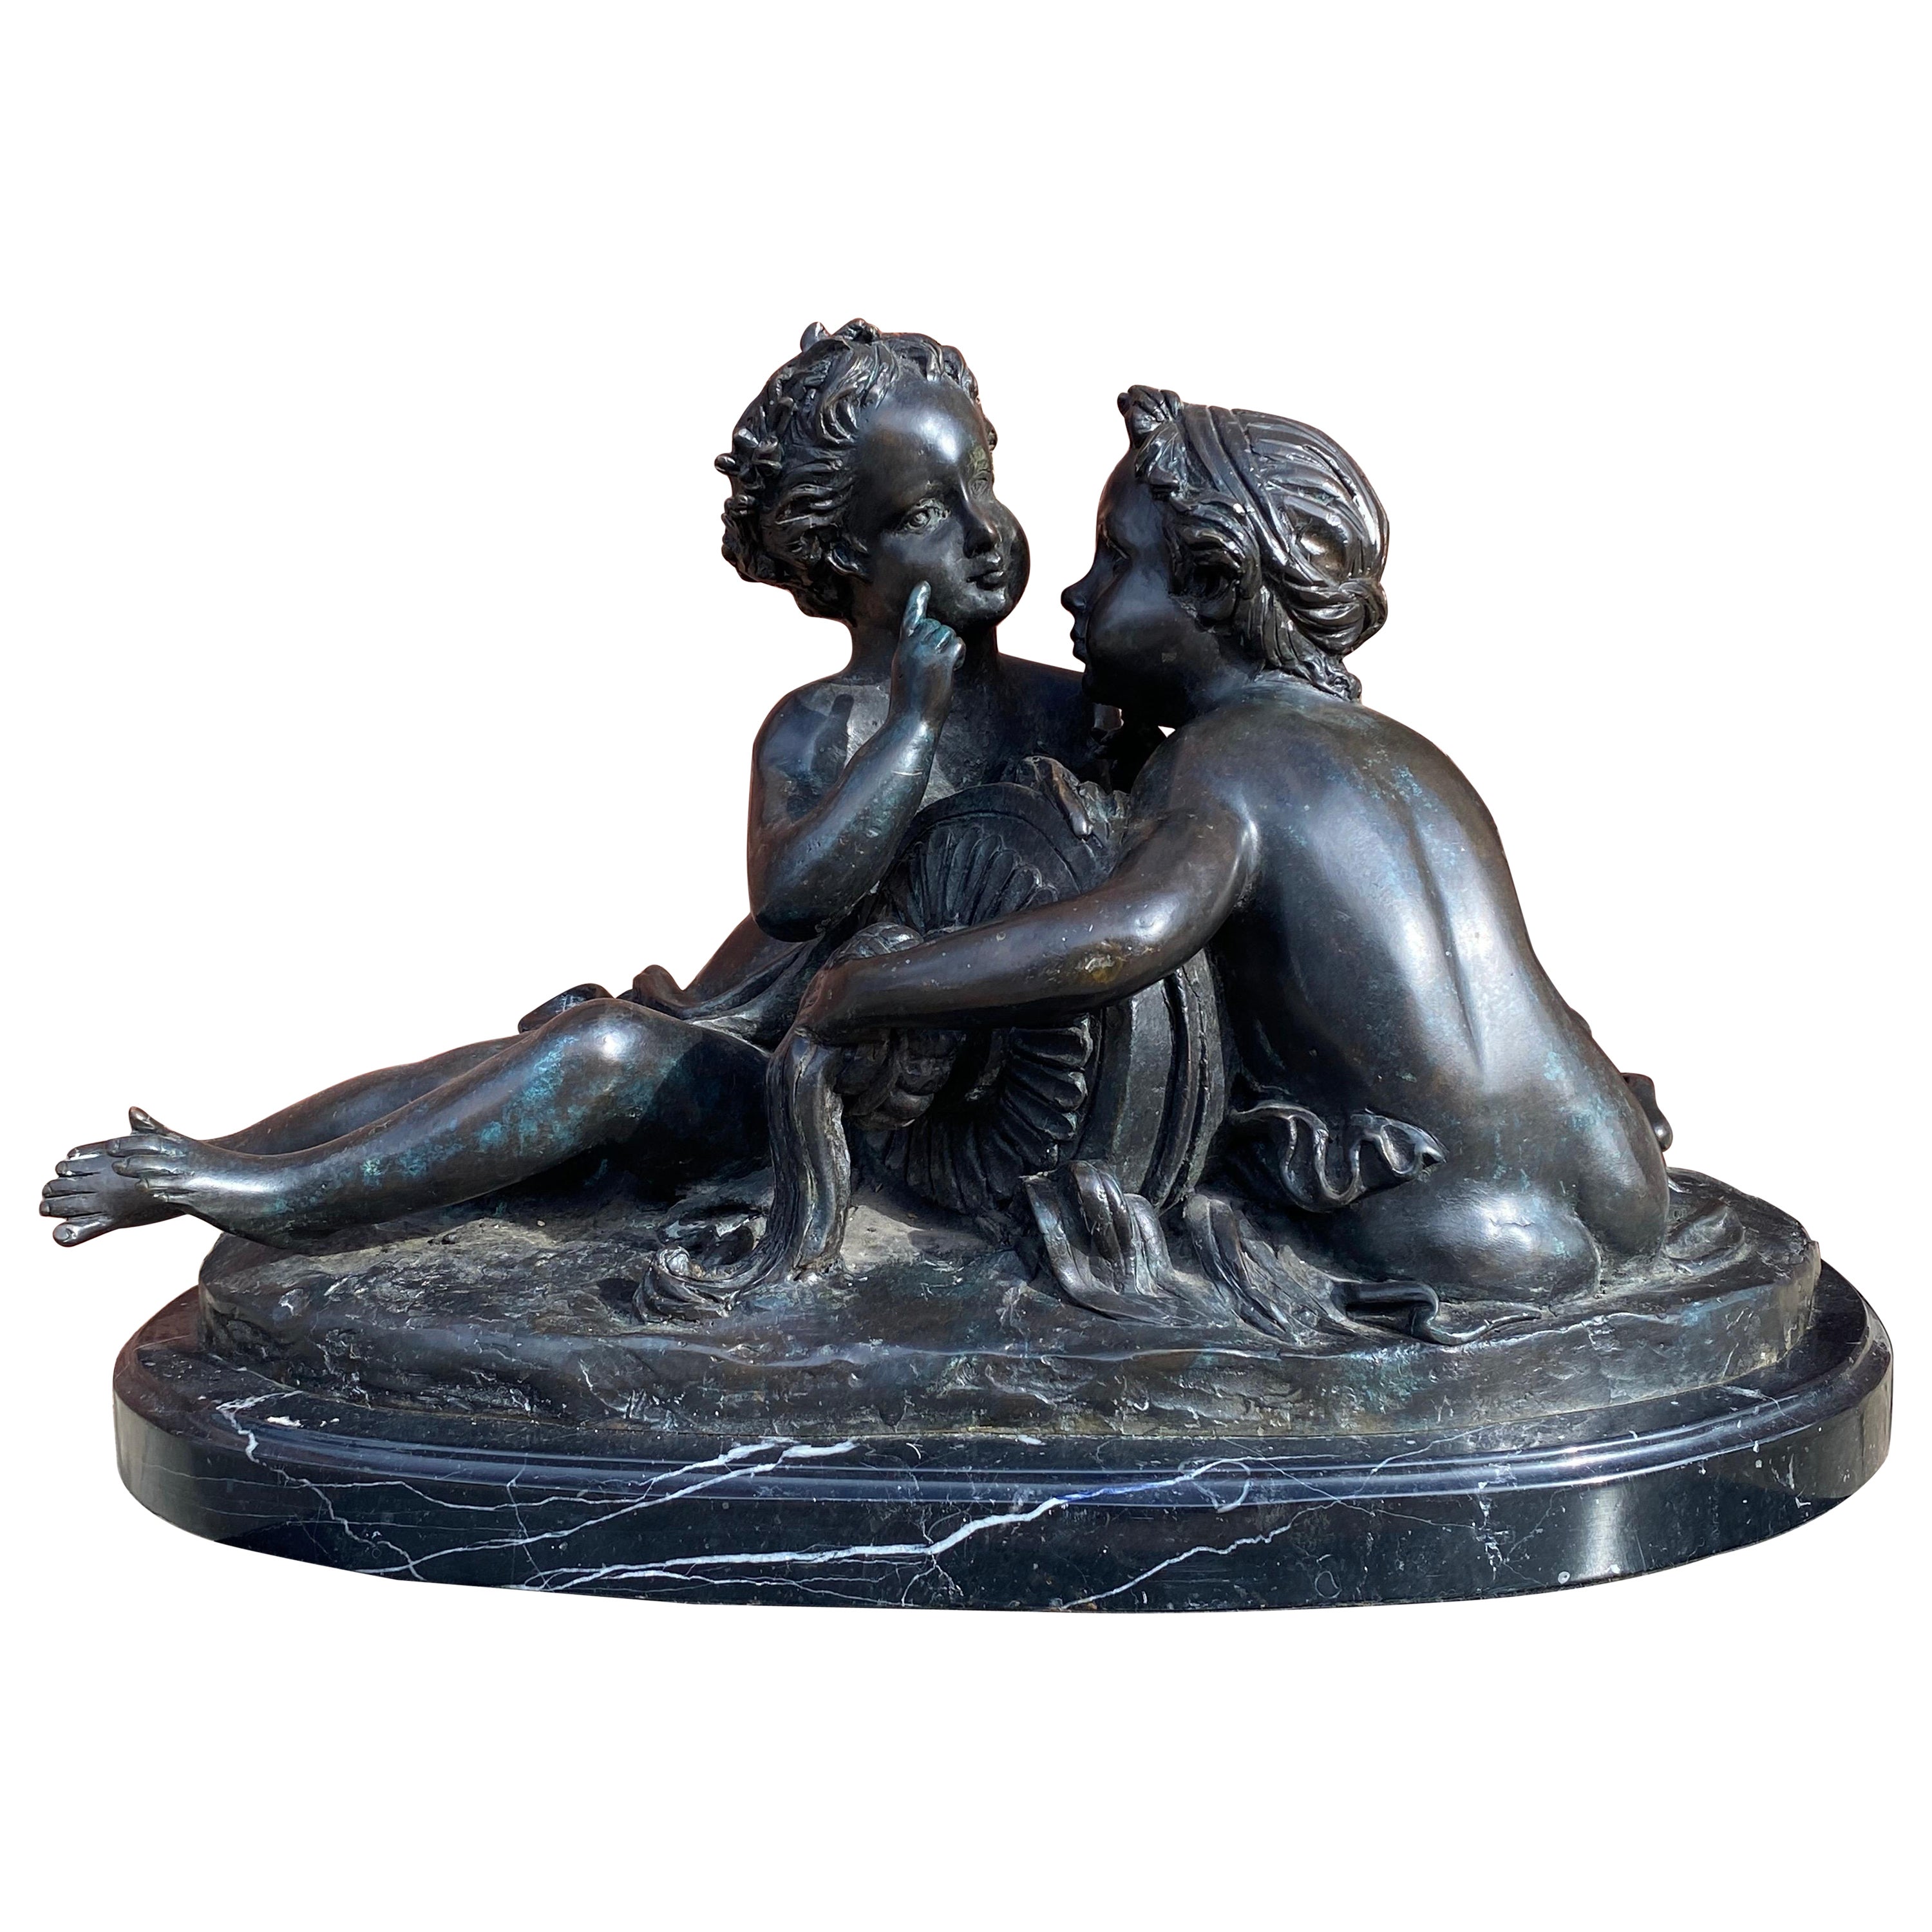 Antique Bronze Putti on Marble Base styled after Albert-Ernest Carrier-Belleuse